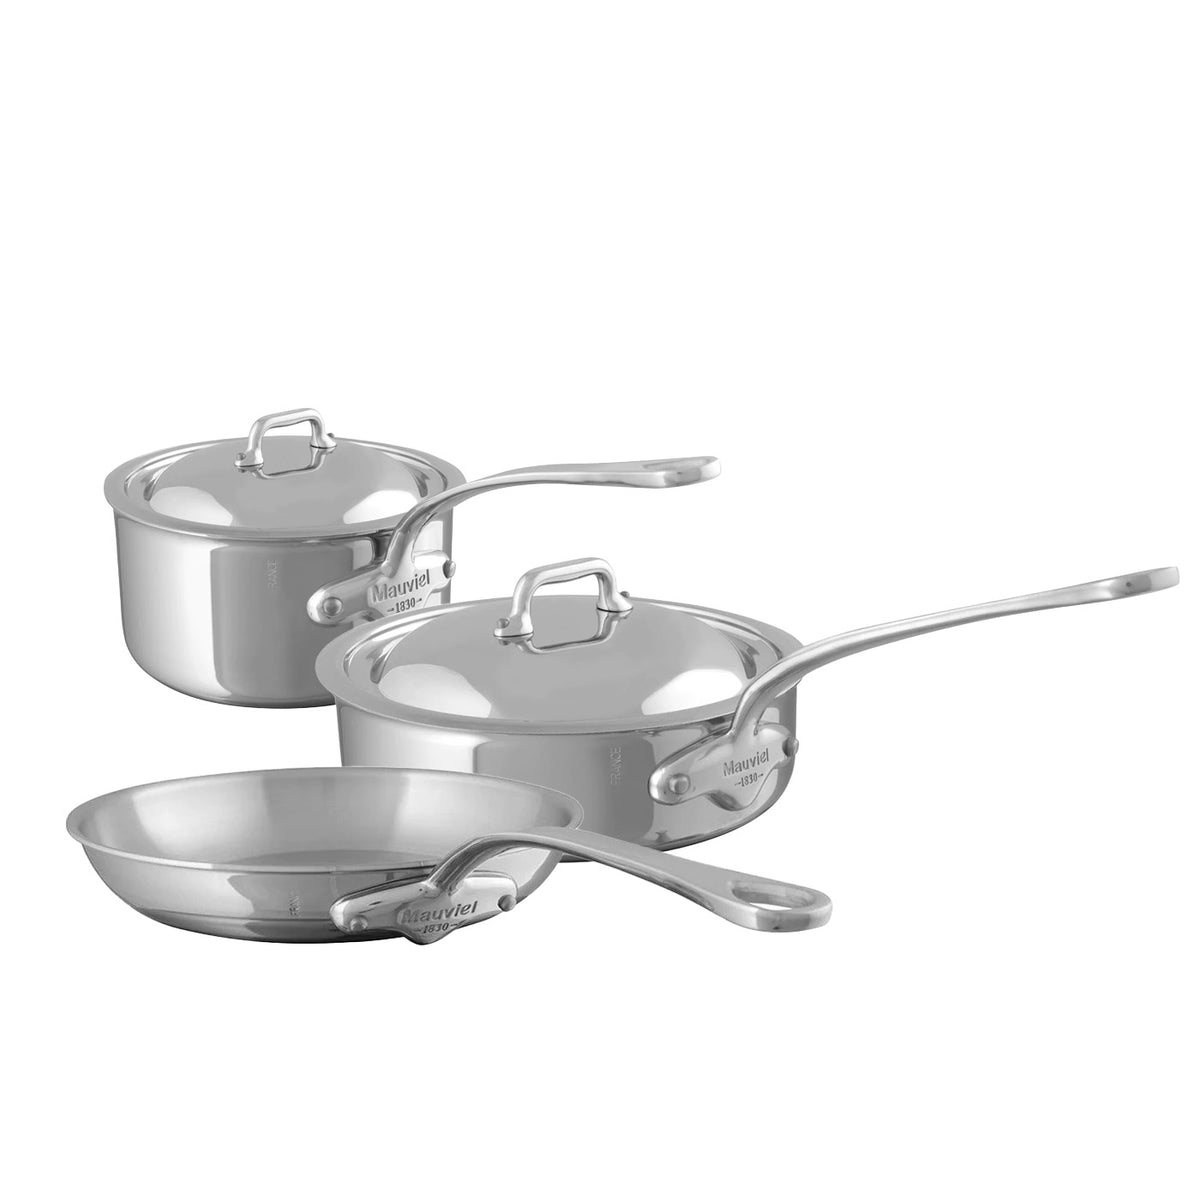 Mauviel M'COOK 5-Ply Rondeau With Lid, Cast Stainless Steel Handles, 6, Mauviel USA